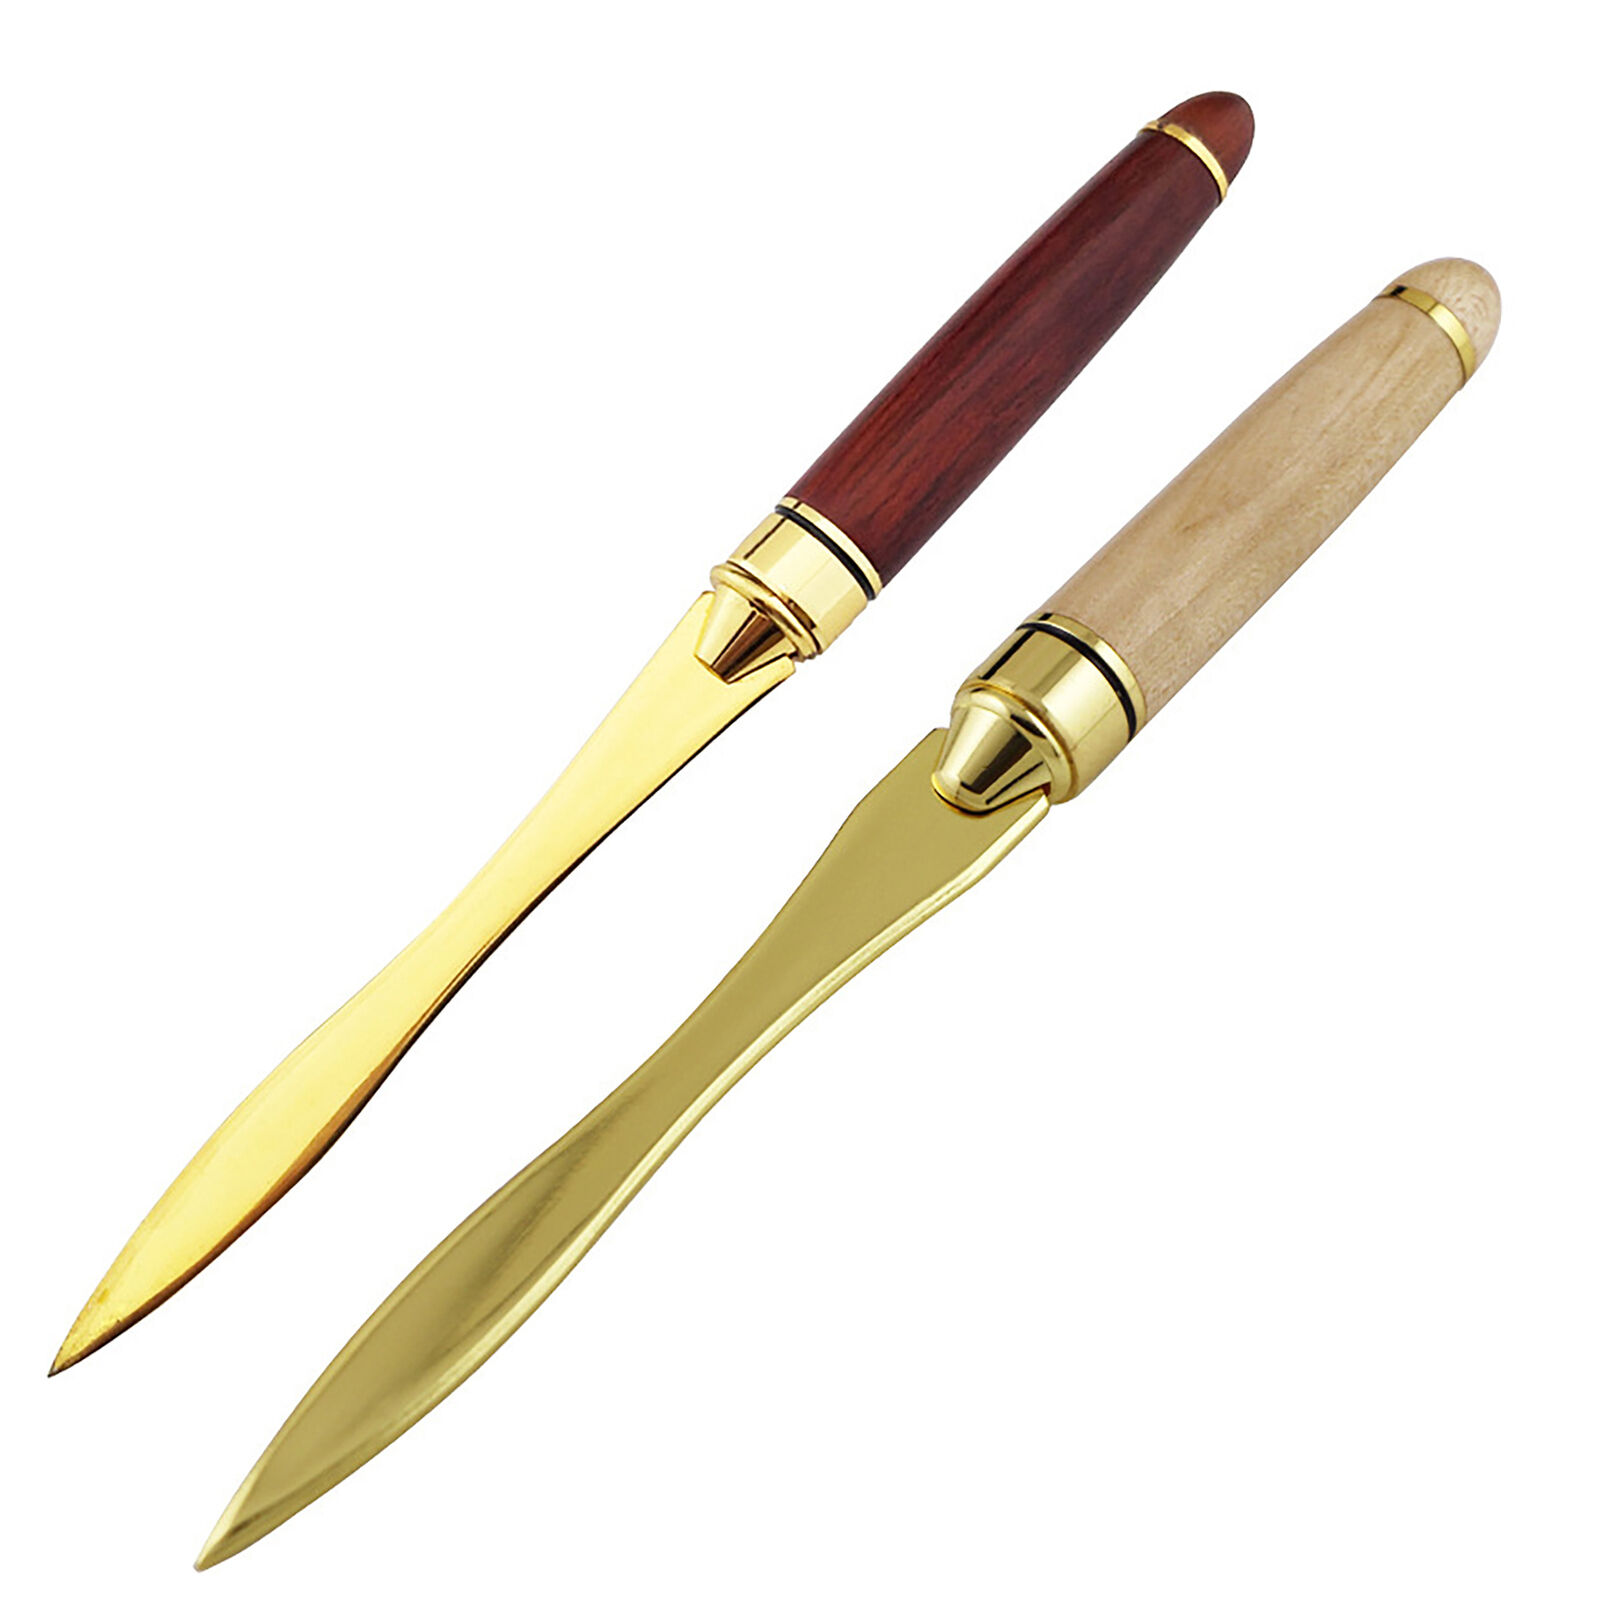 Wood Handle Letter Opener Stainless Steel Cut Paper Blunt Knives Redwood Colored